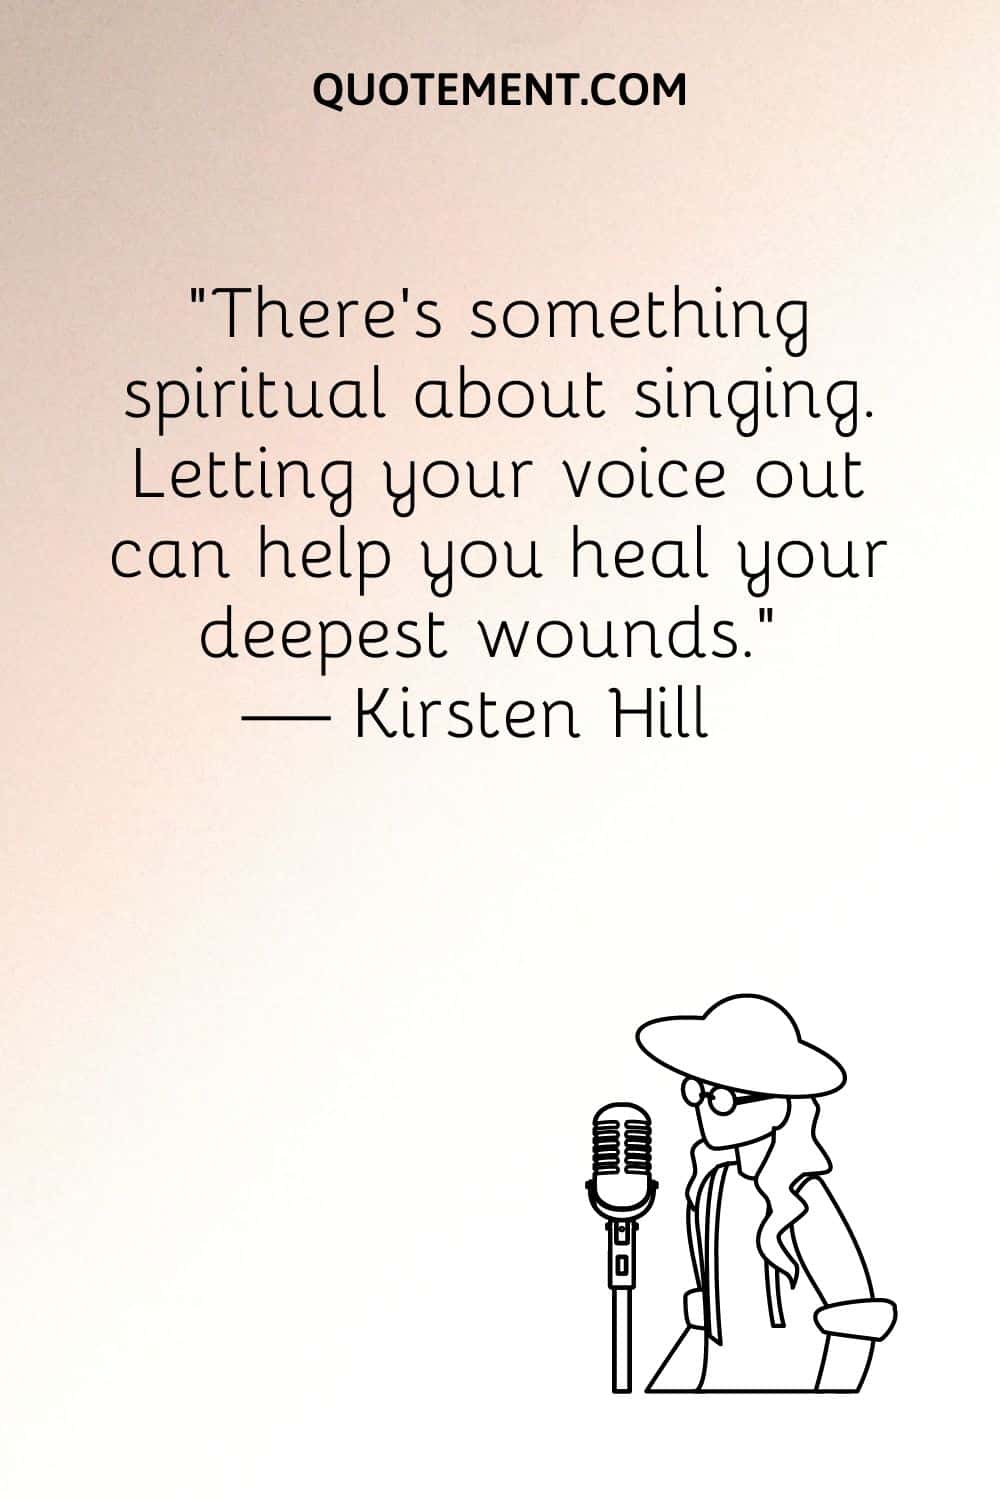 “There’s something spiritual about singing. Letting your voice out can help you heal your deepest wounds.” — Kirsten Hill